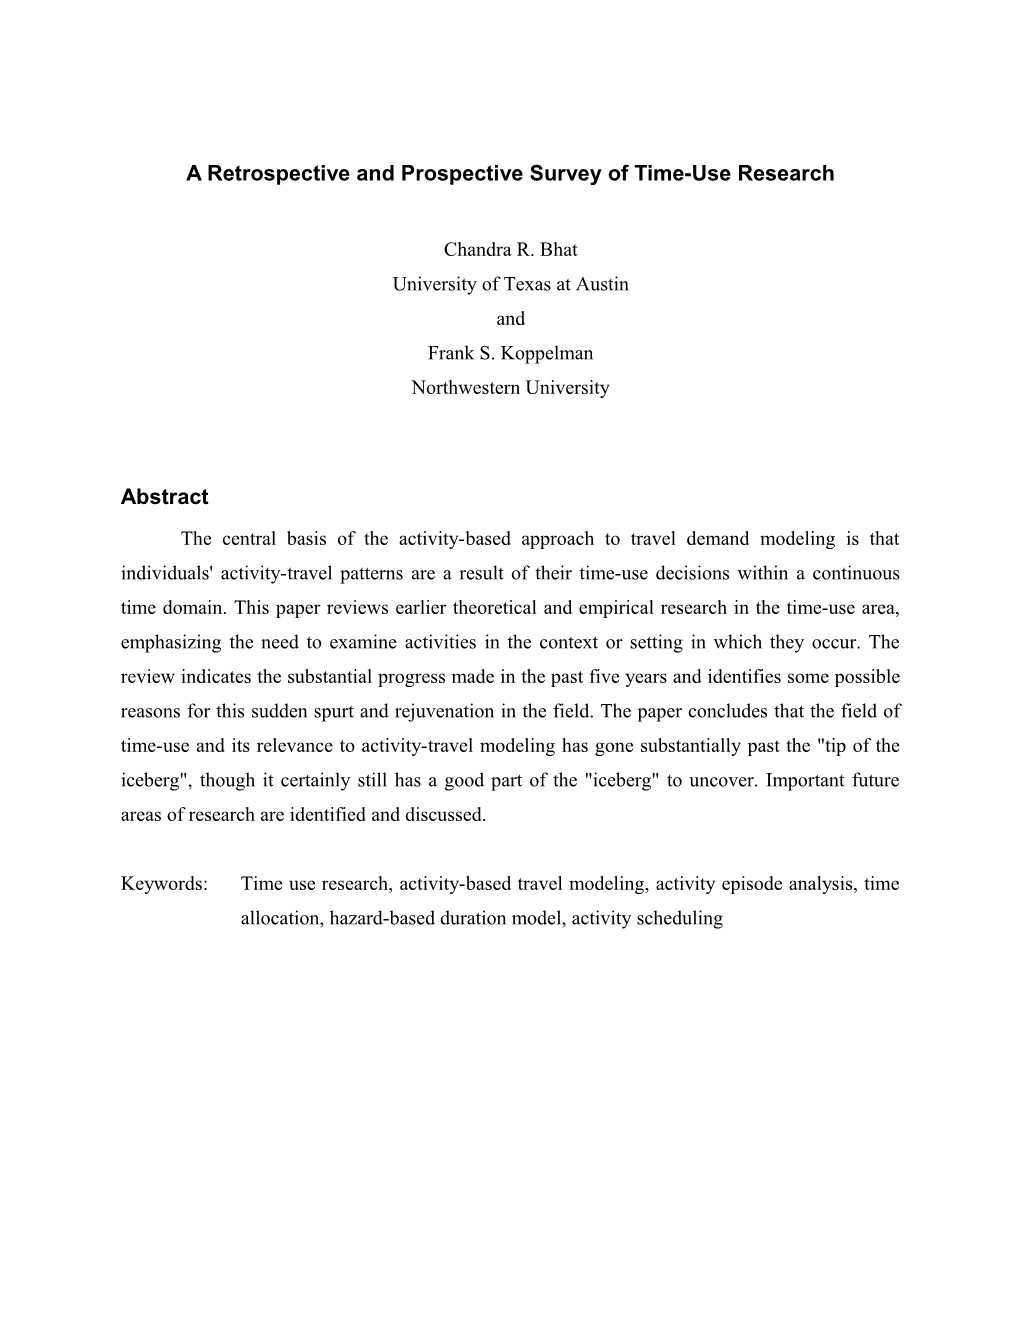 A Retrospective and Prospective Survey of Time-Use Research